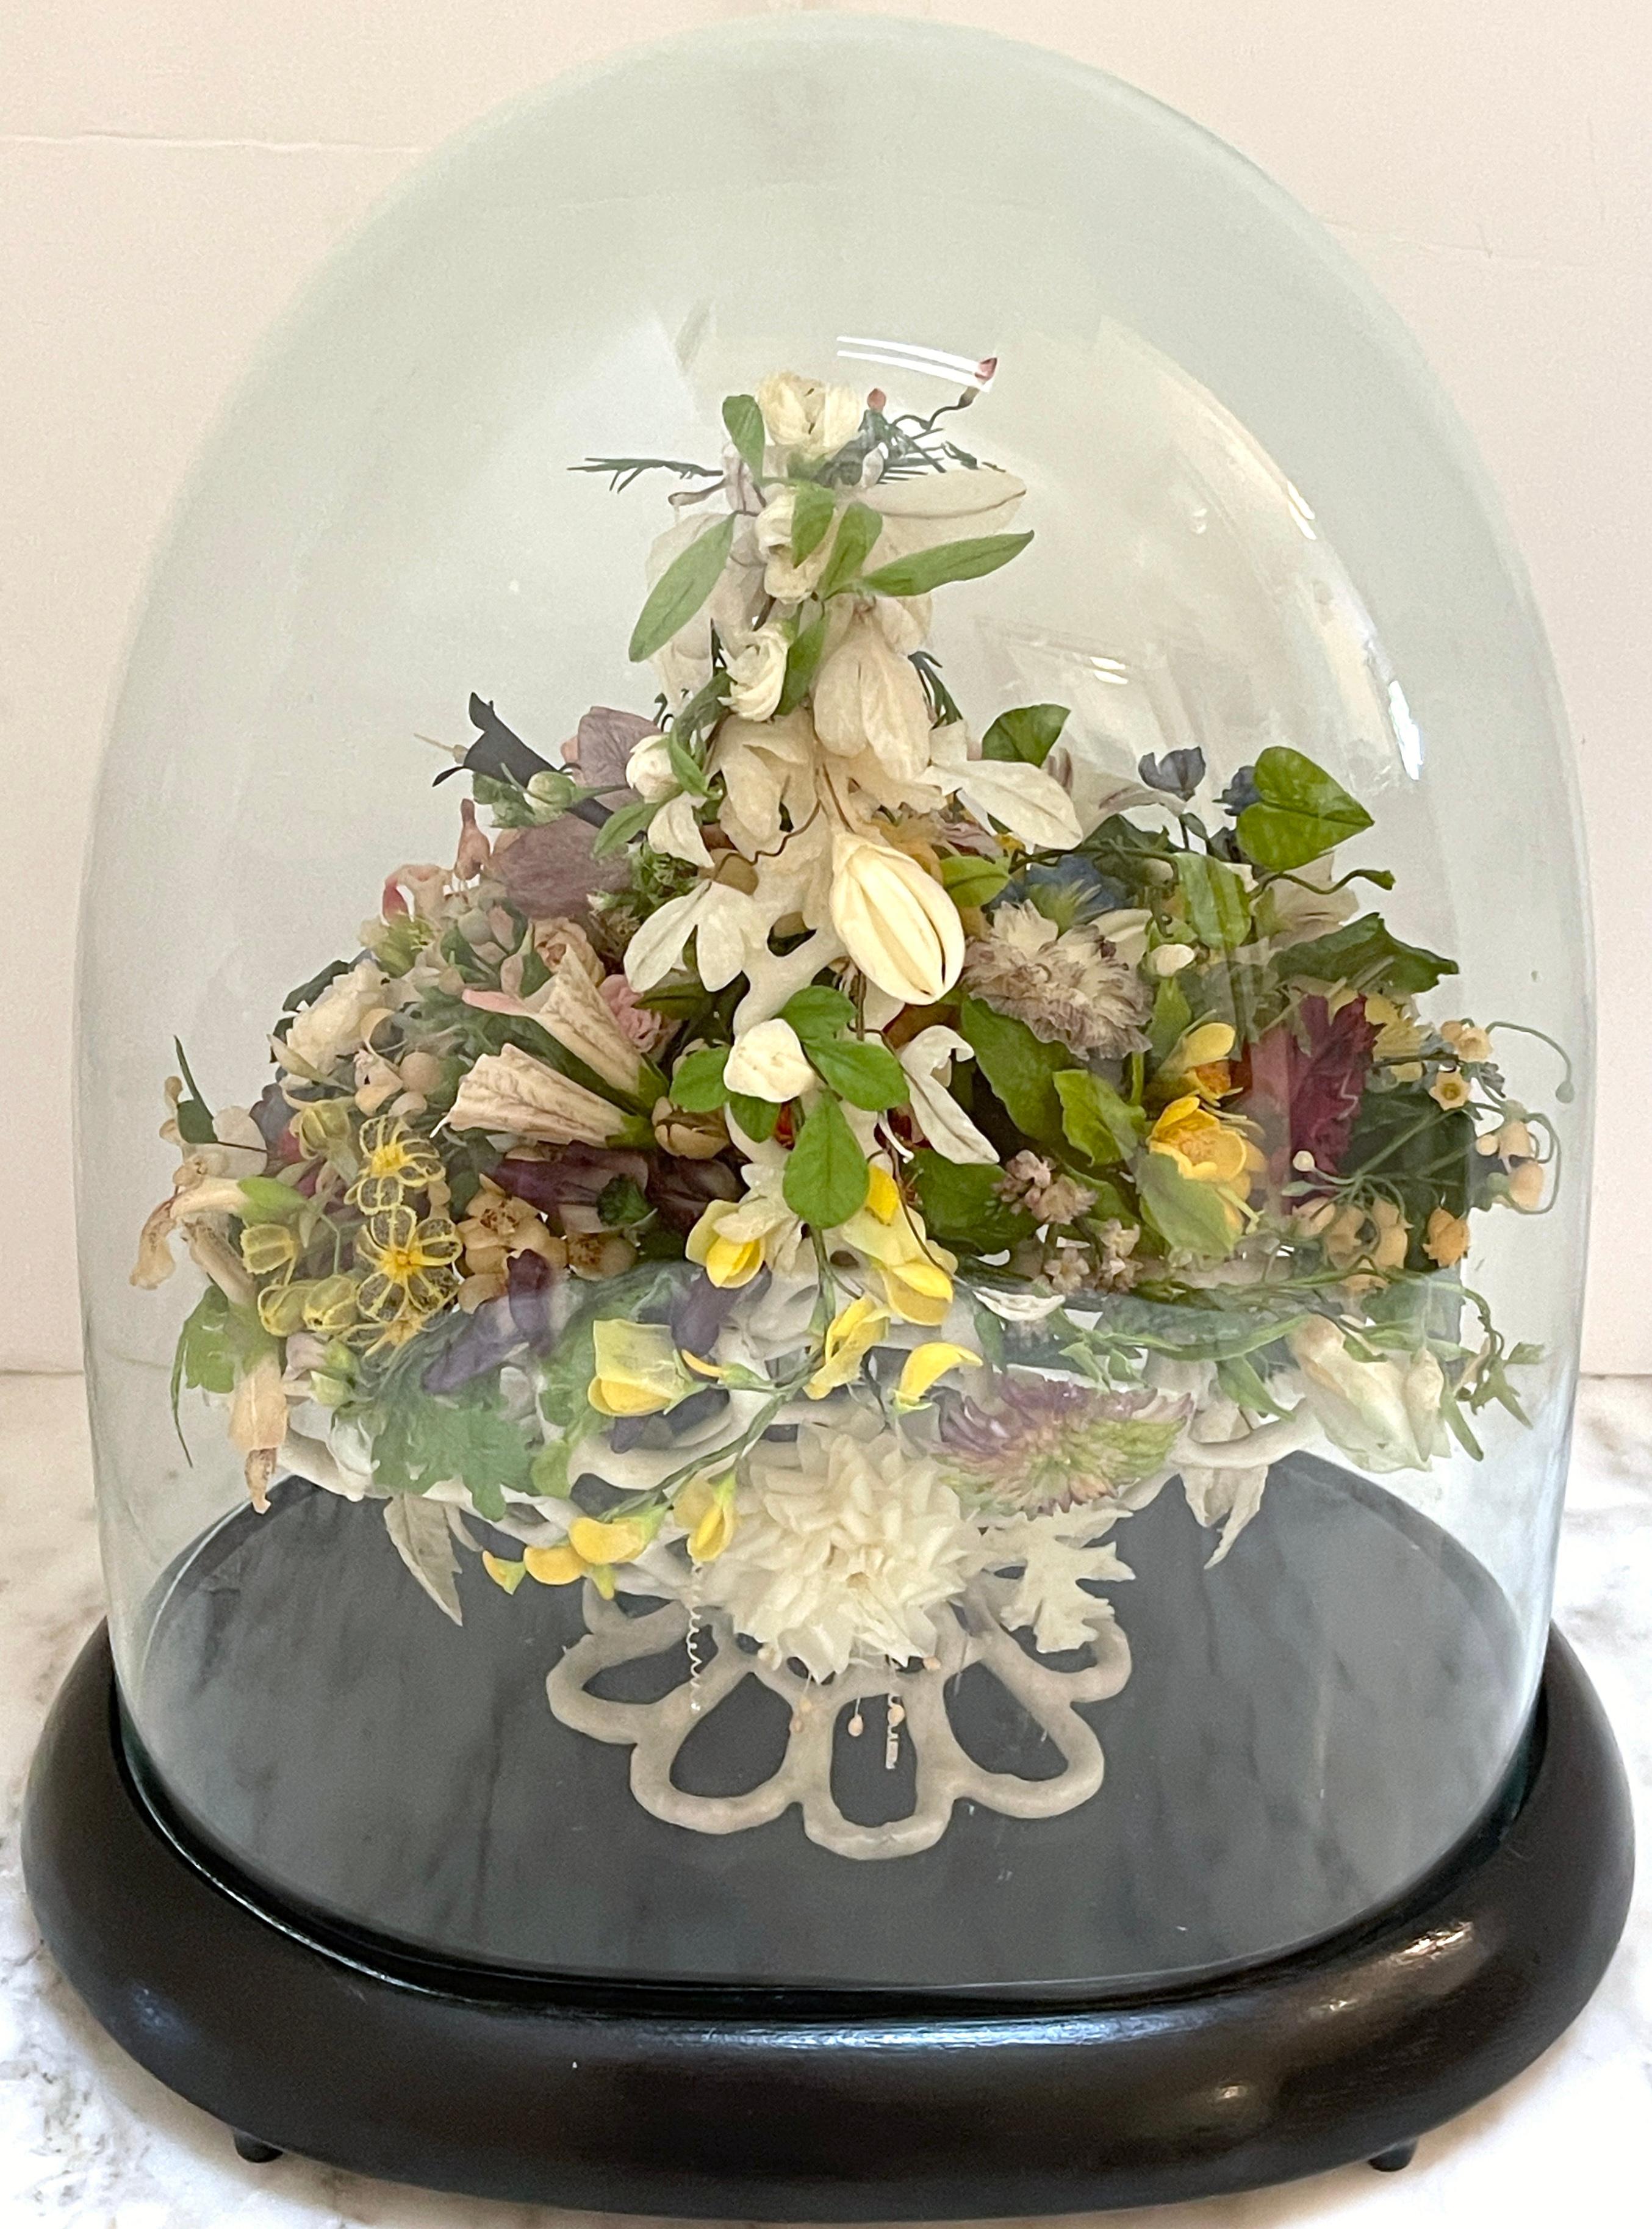 Victorian Wax Flower Basket Still Life  Under Oval Glass Dome
USA, Circa 1880 

An exquisite testament to Victorian artistry: a stunning wax flower Basket still life originating from the USA, circa 1880. This exceptional piece stands encased within